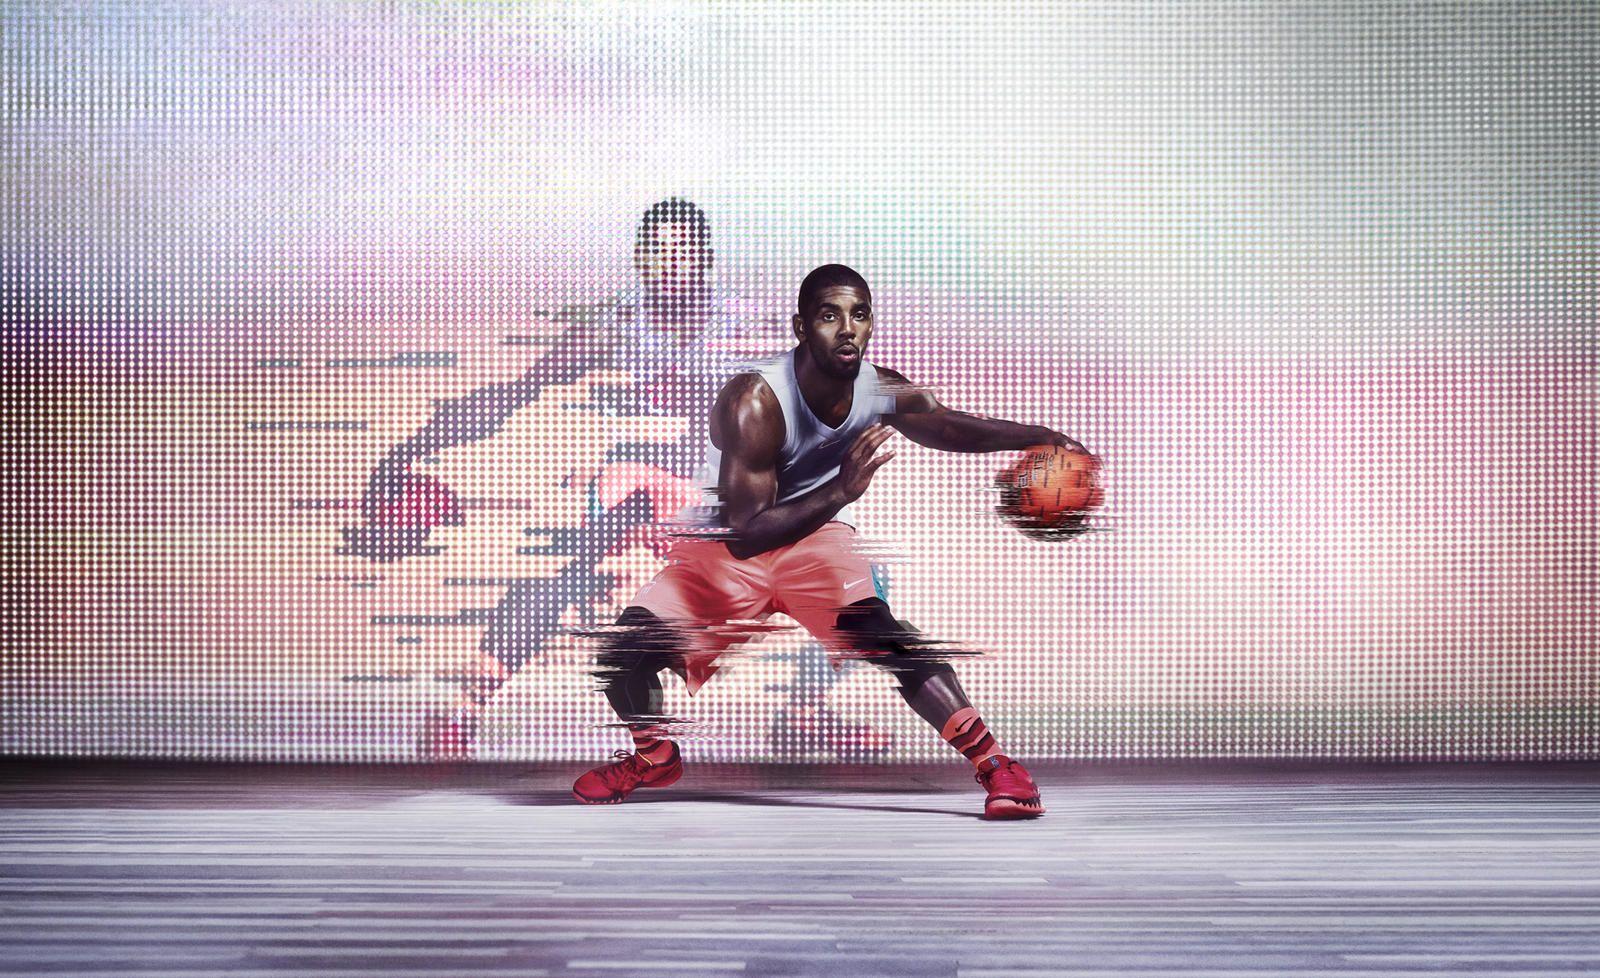 Nike Welcomes Kyrie Irving to The Signature Athlete Family